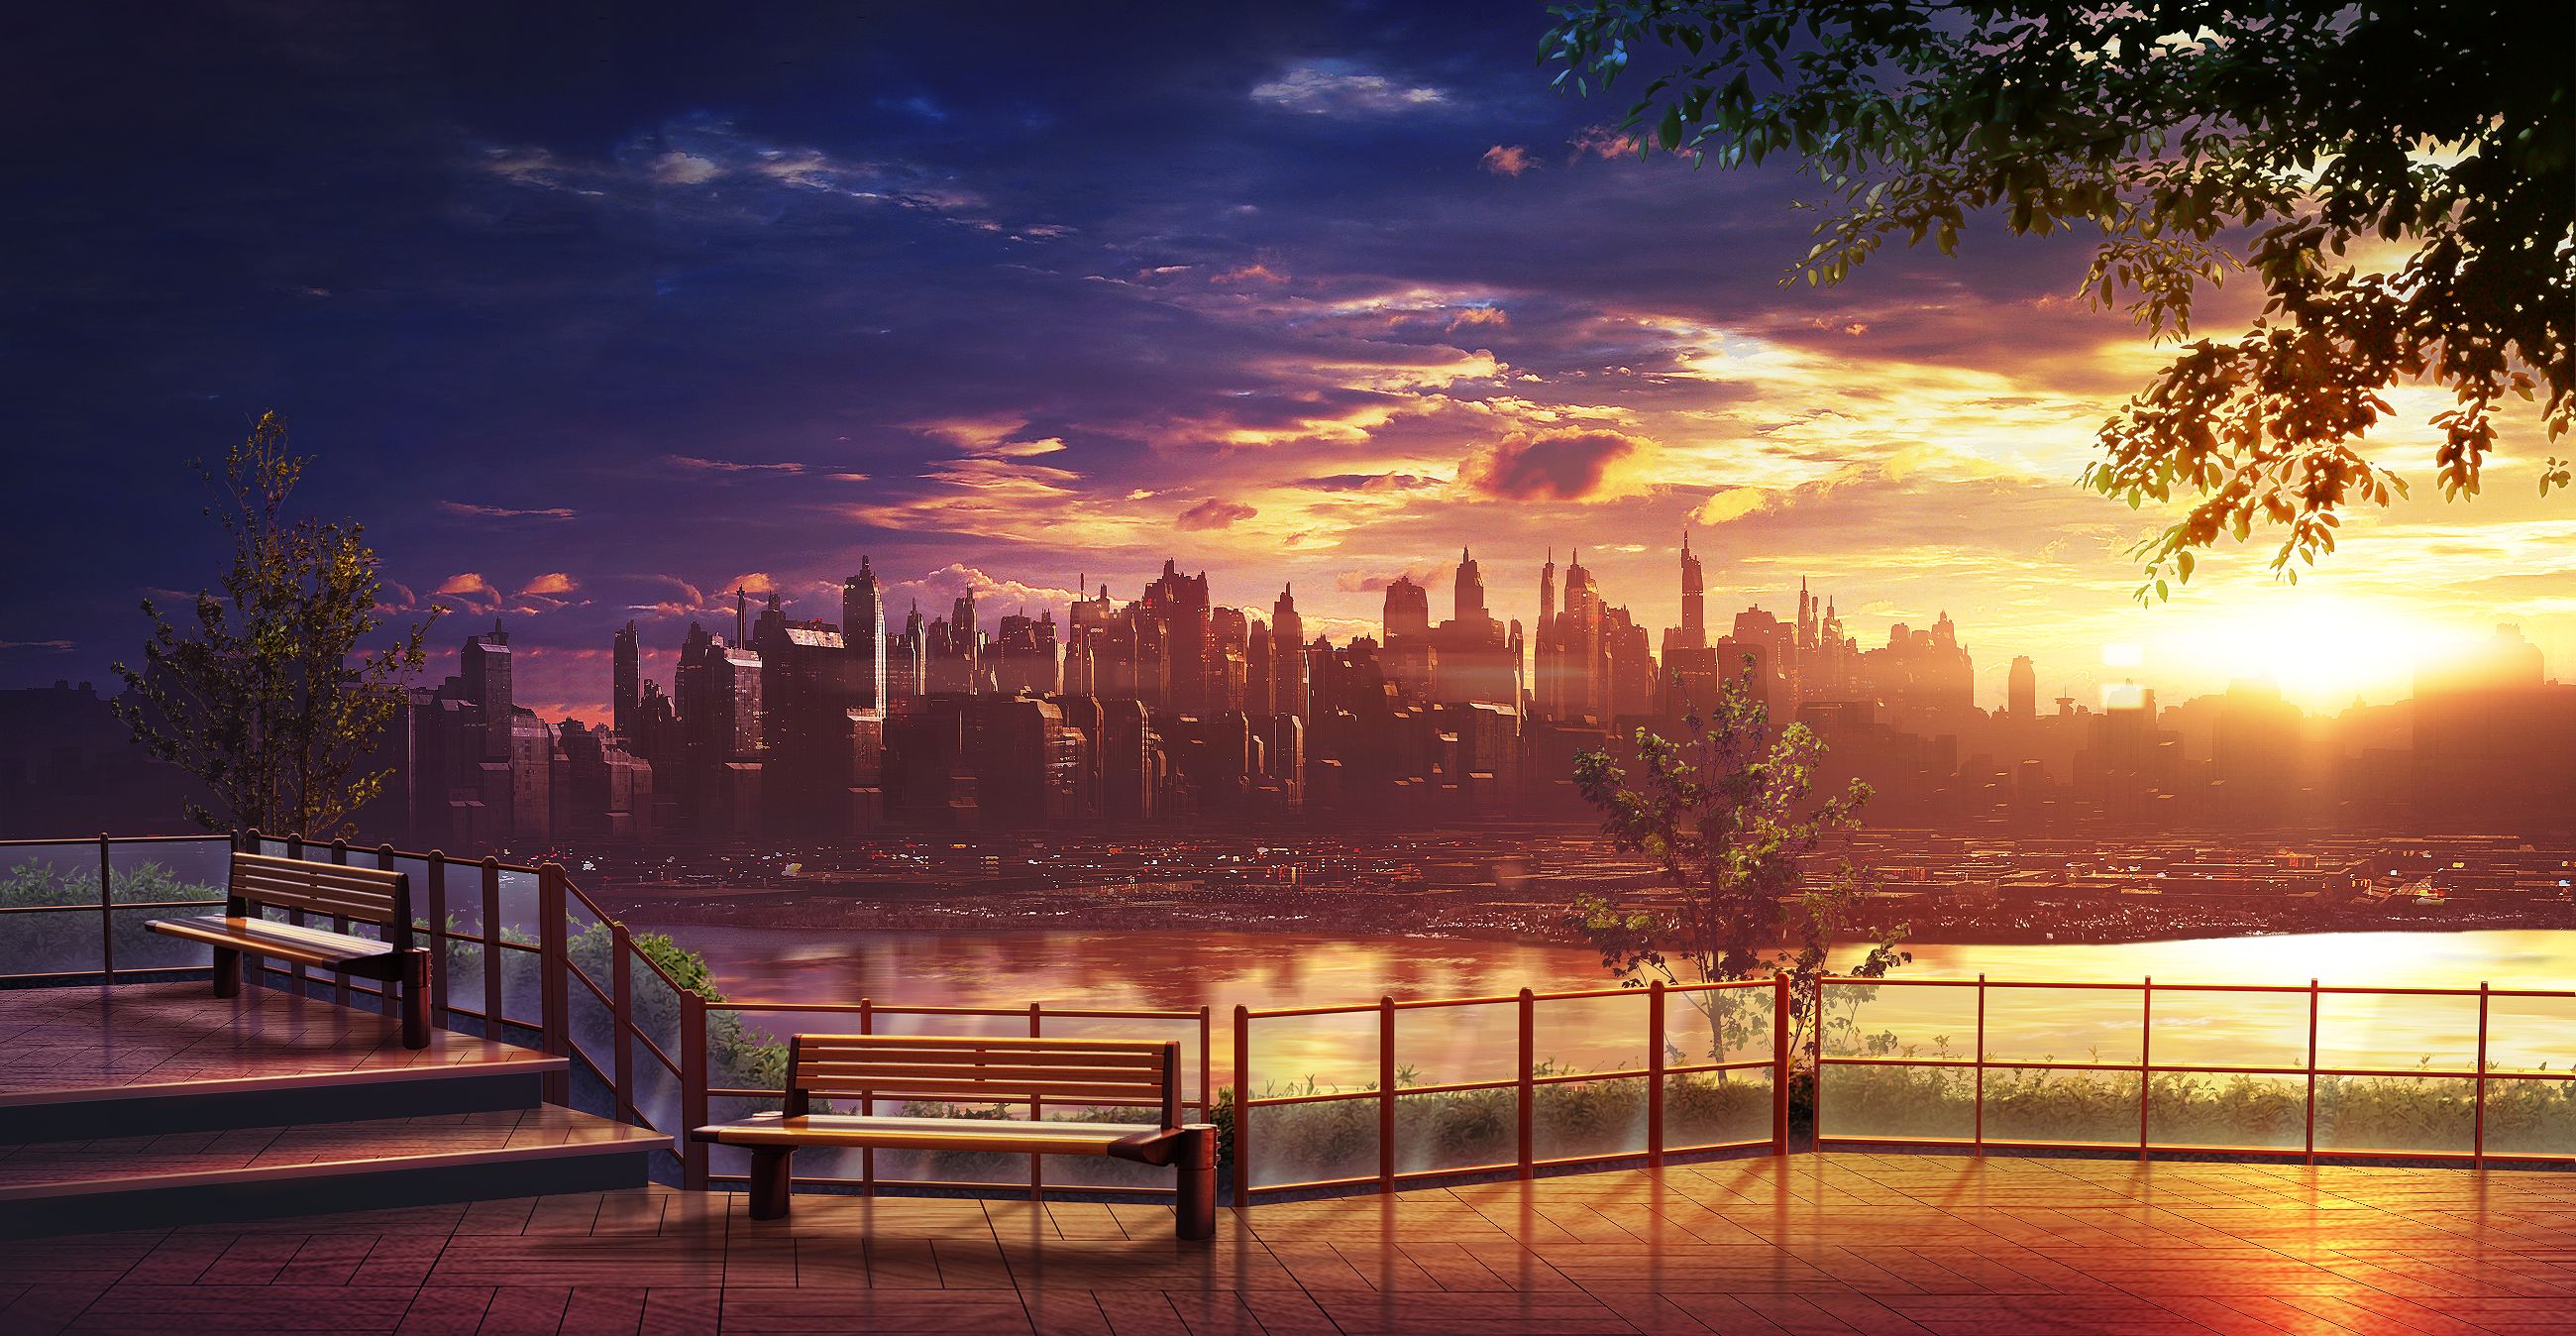 stairs, sky, evening, anime, city, bench, cloud, lake, parc, sunset